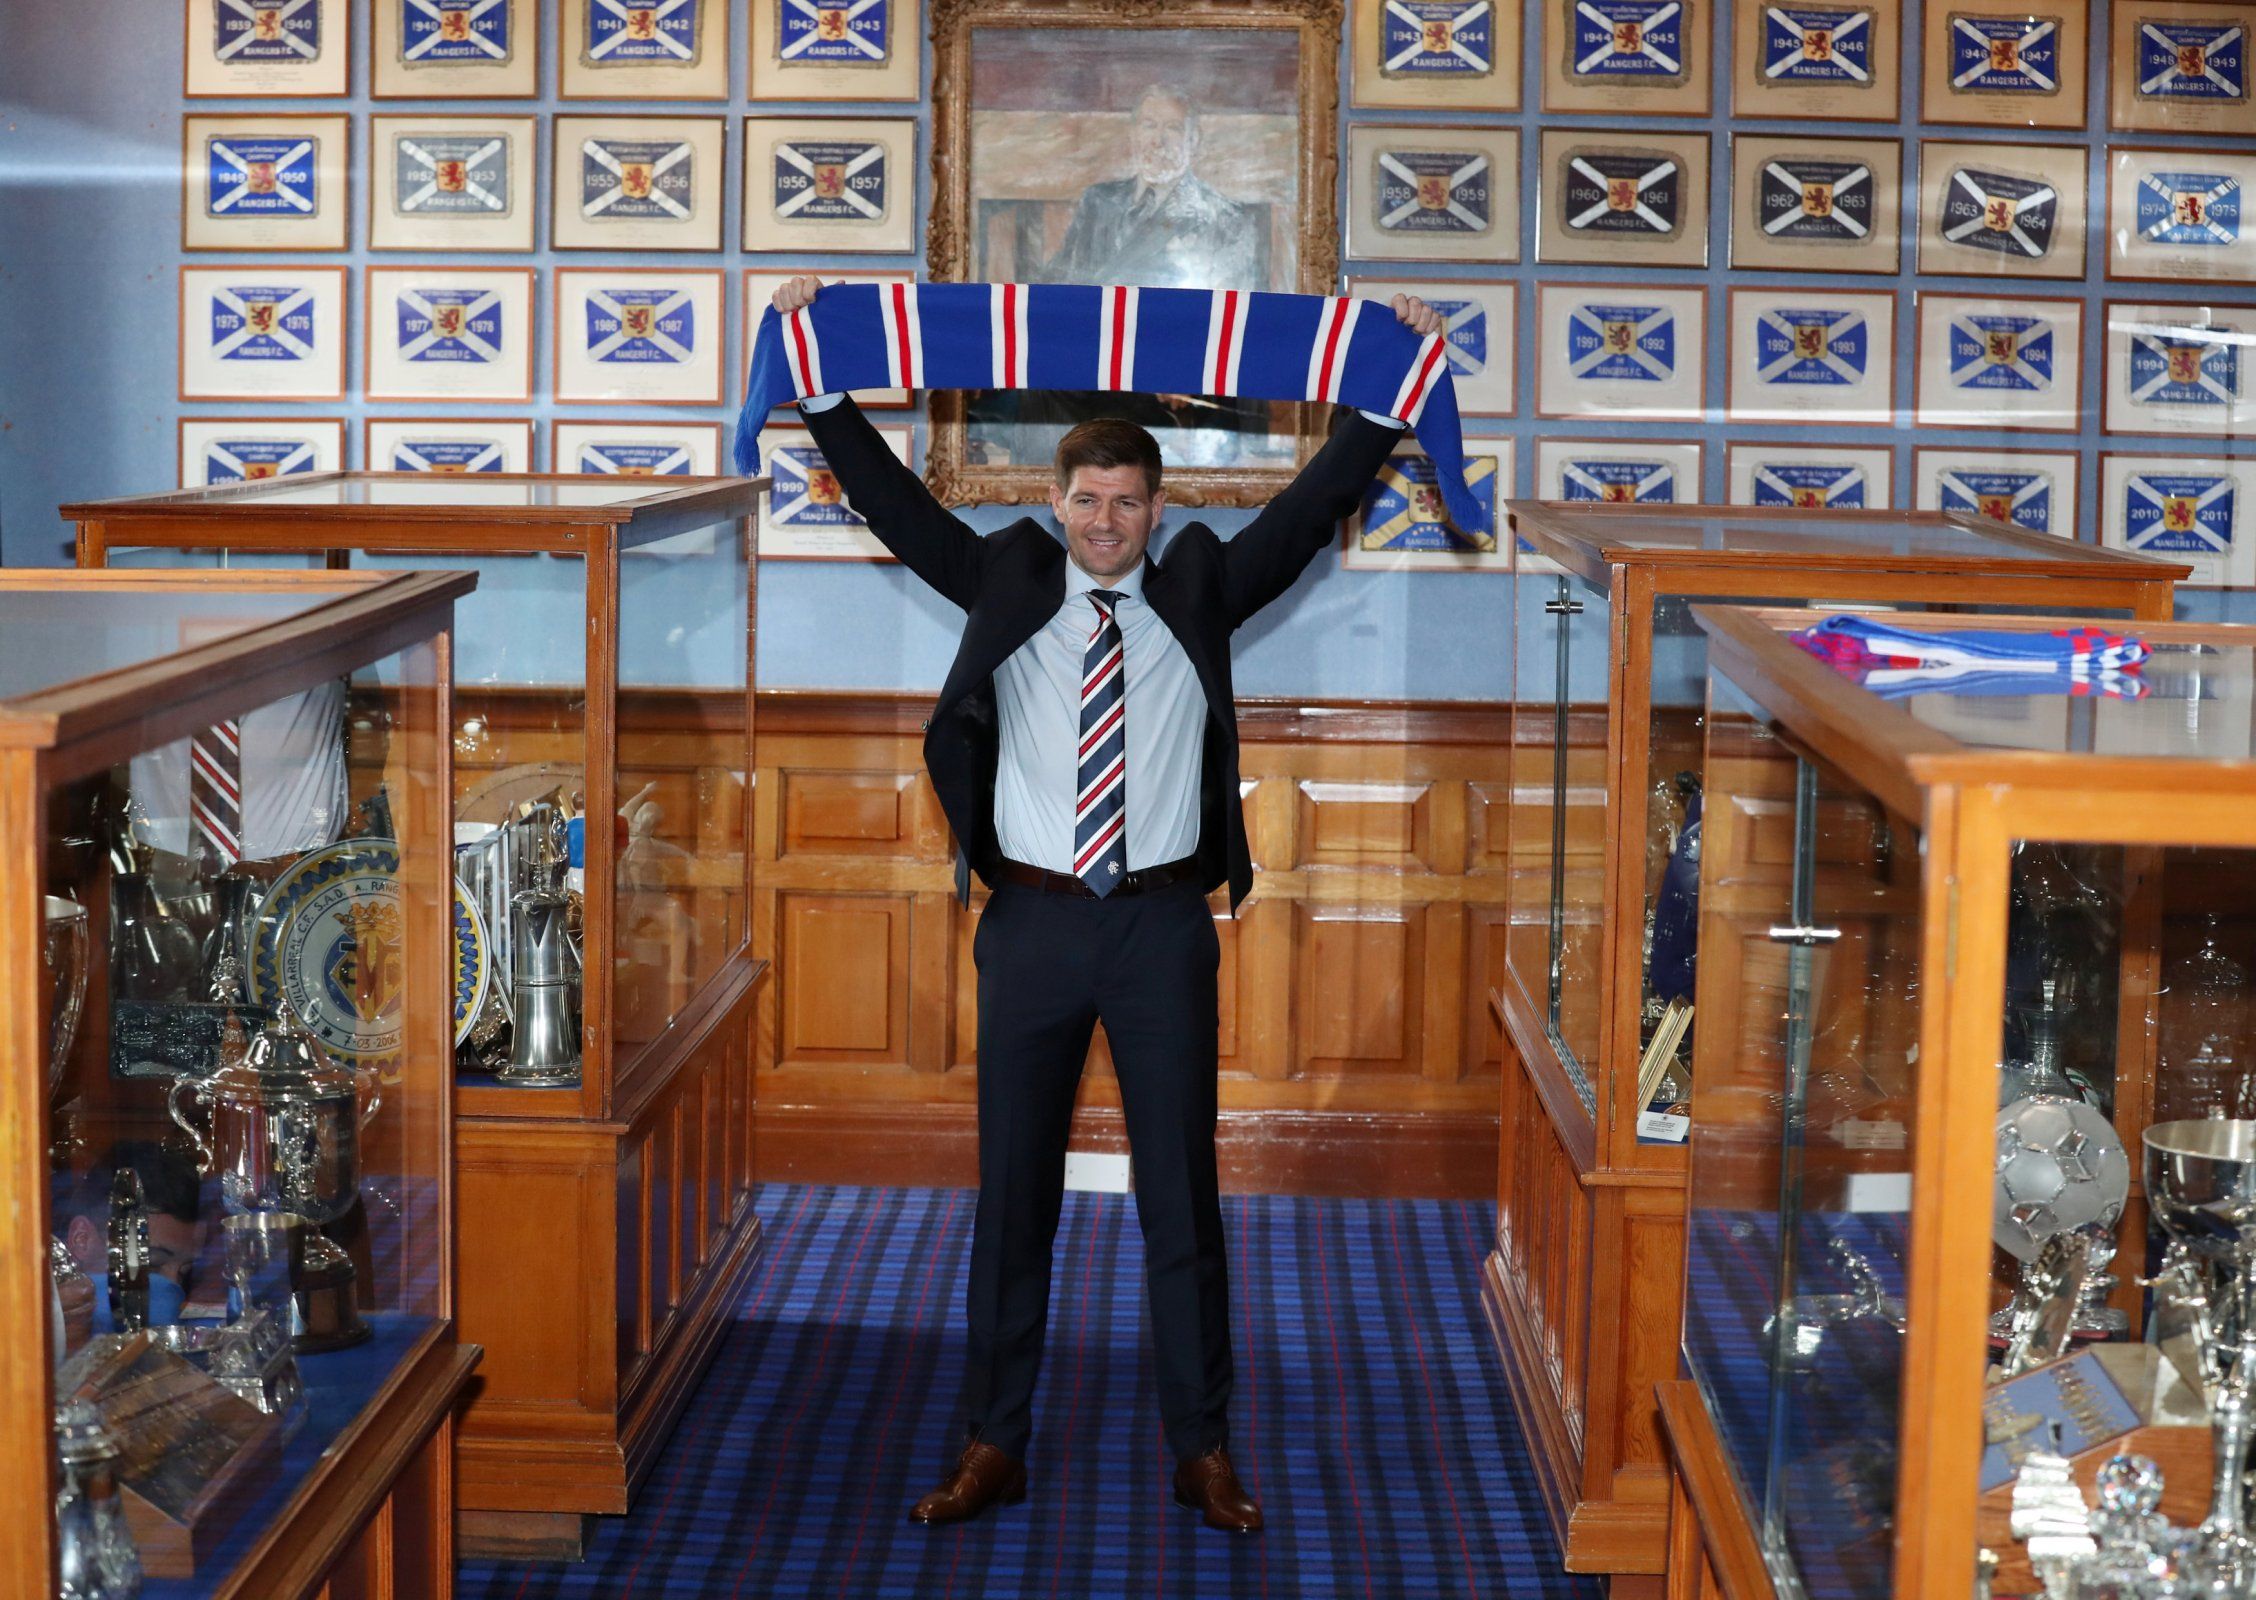 Steven Gerrard is unveiled as Rangers manager